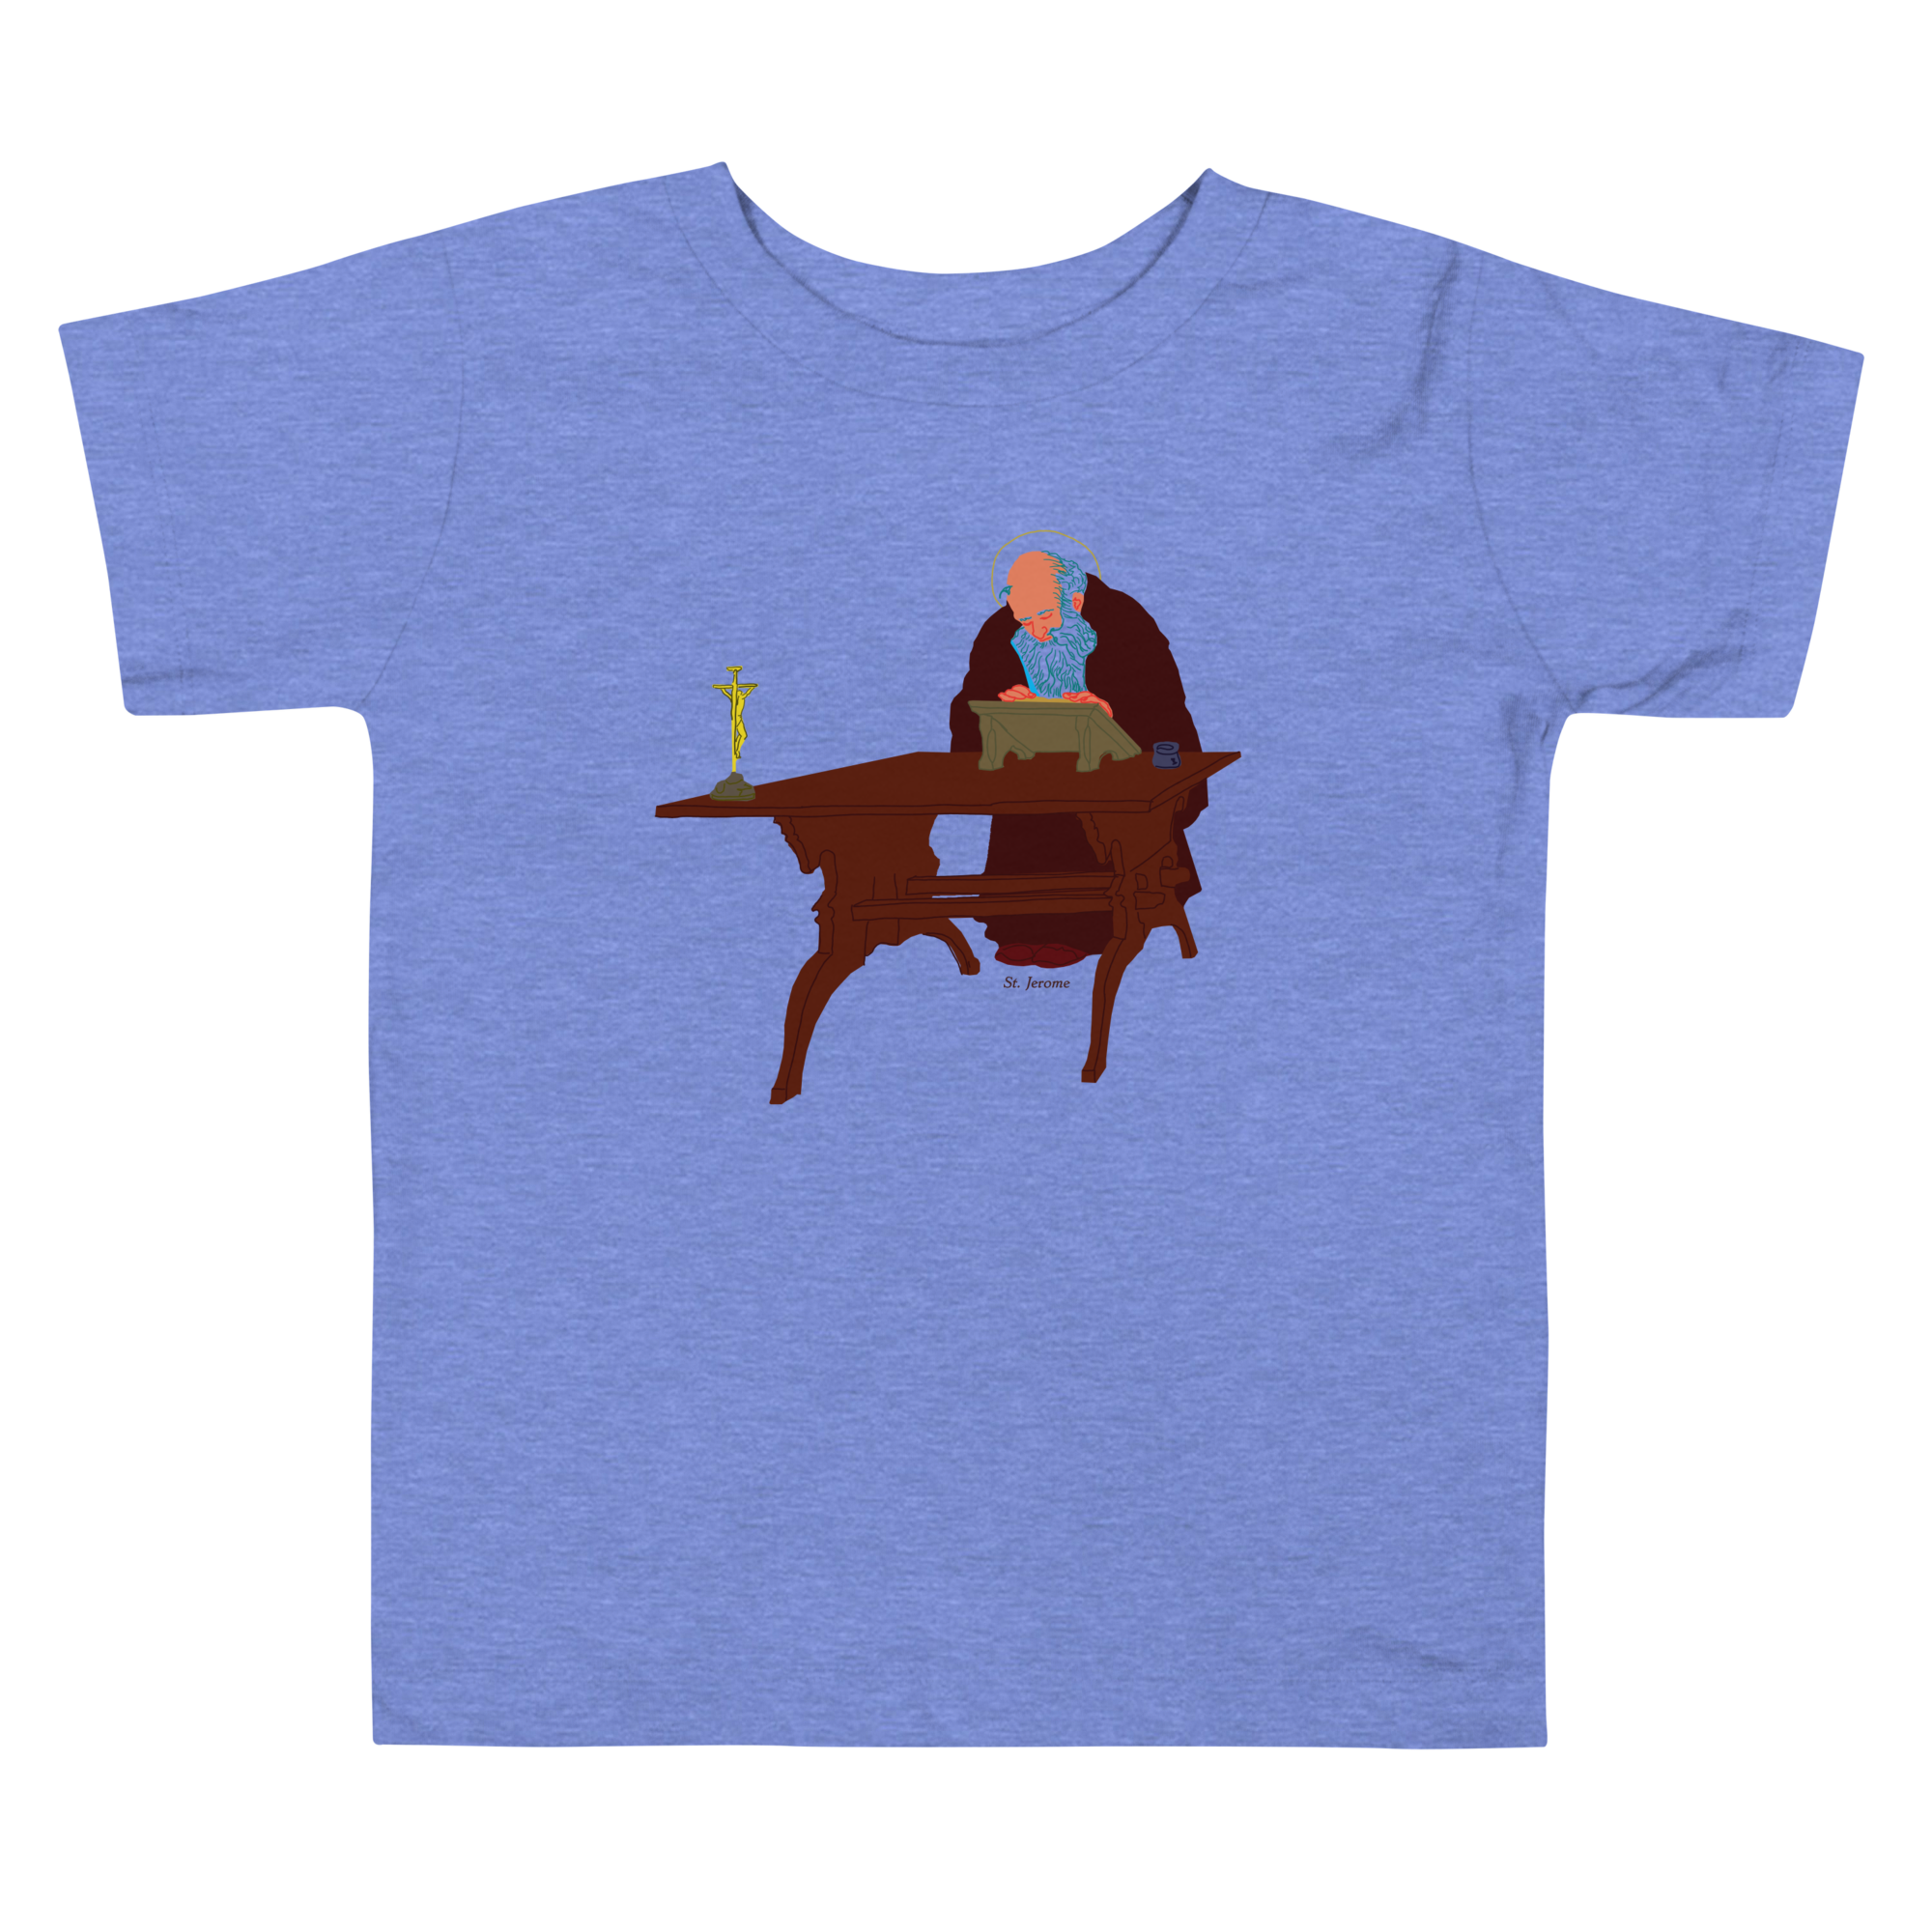 St. Jerome. (Toddler Tee.)